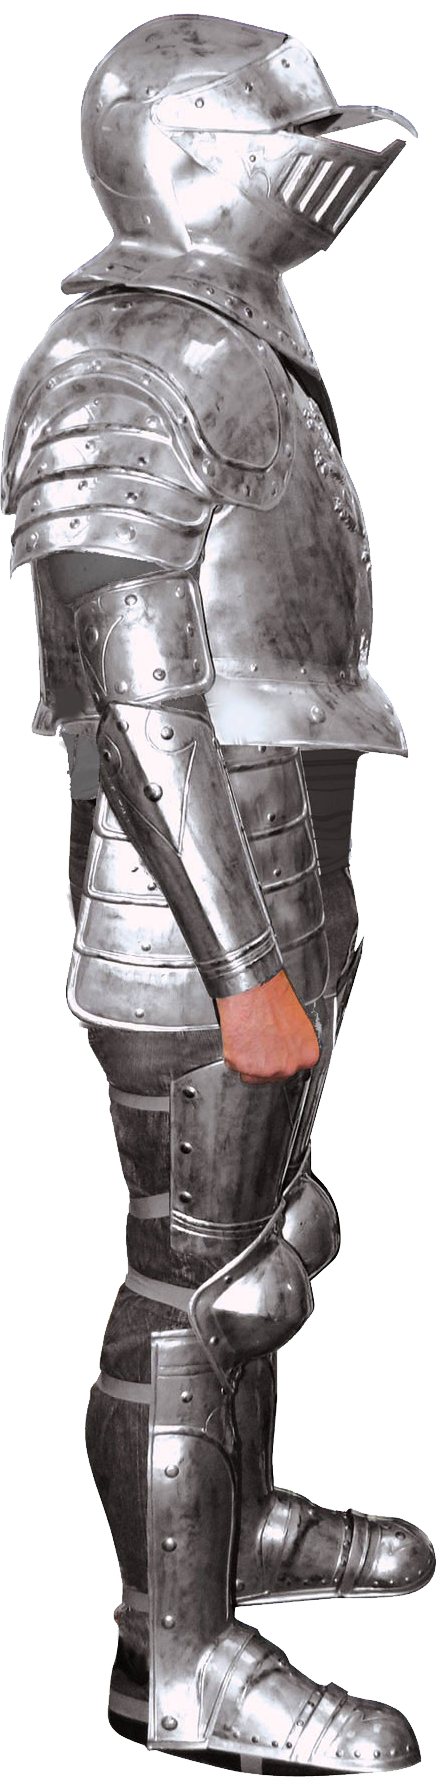 Medival knight PNG image free Download 